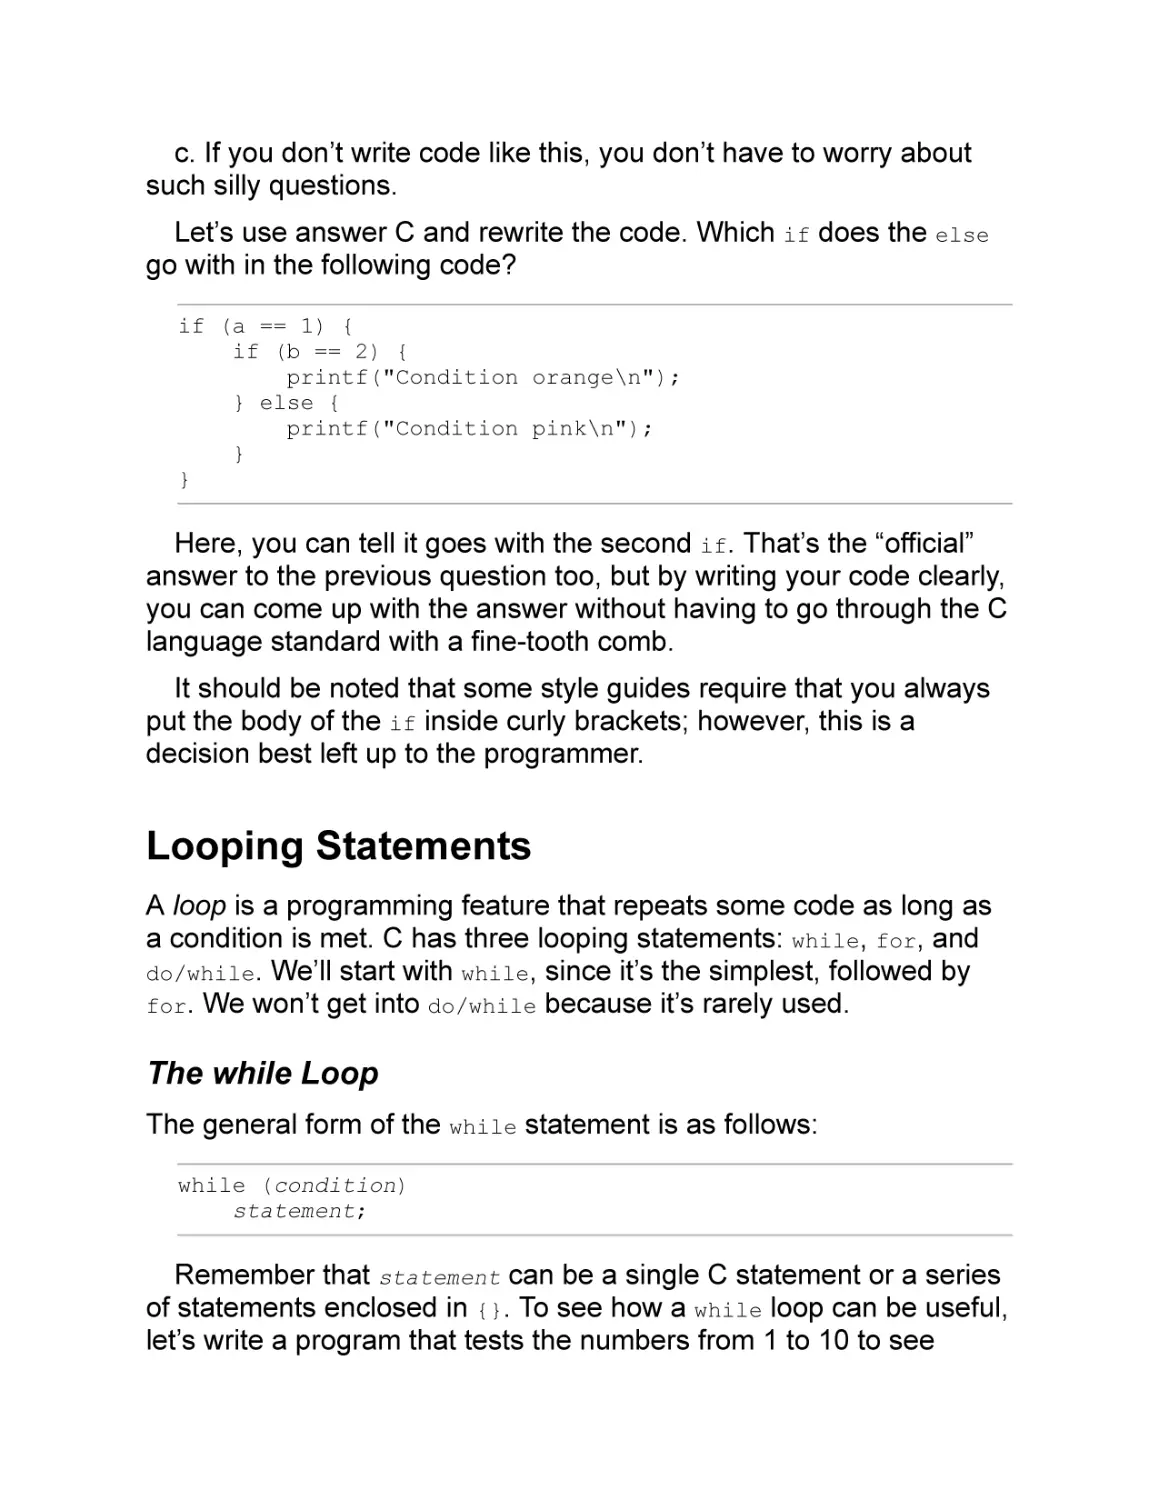 Looping Statements
The while Loop